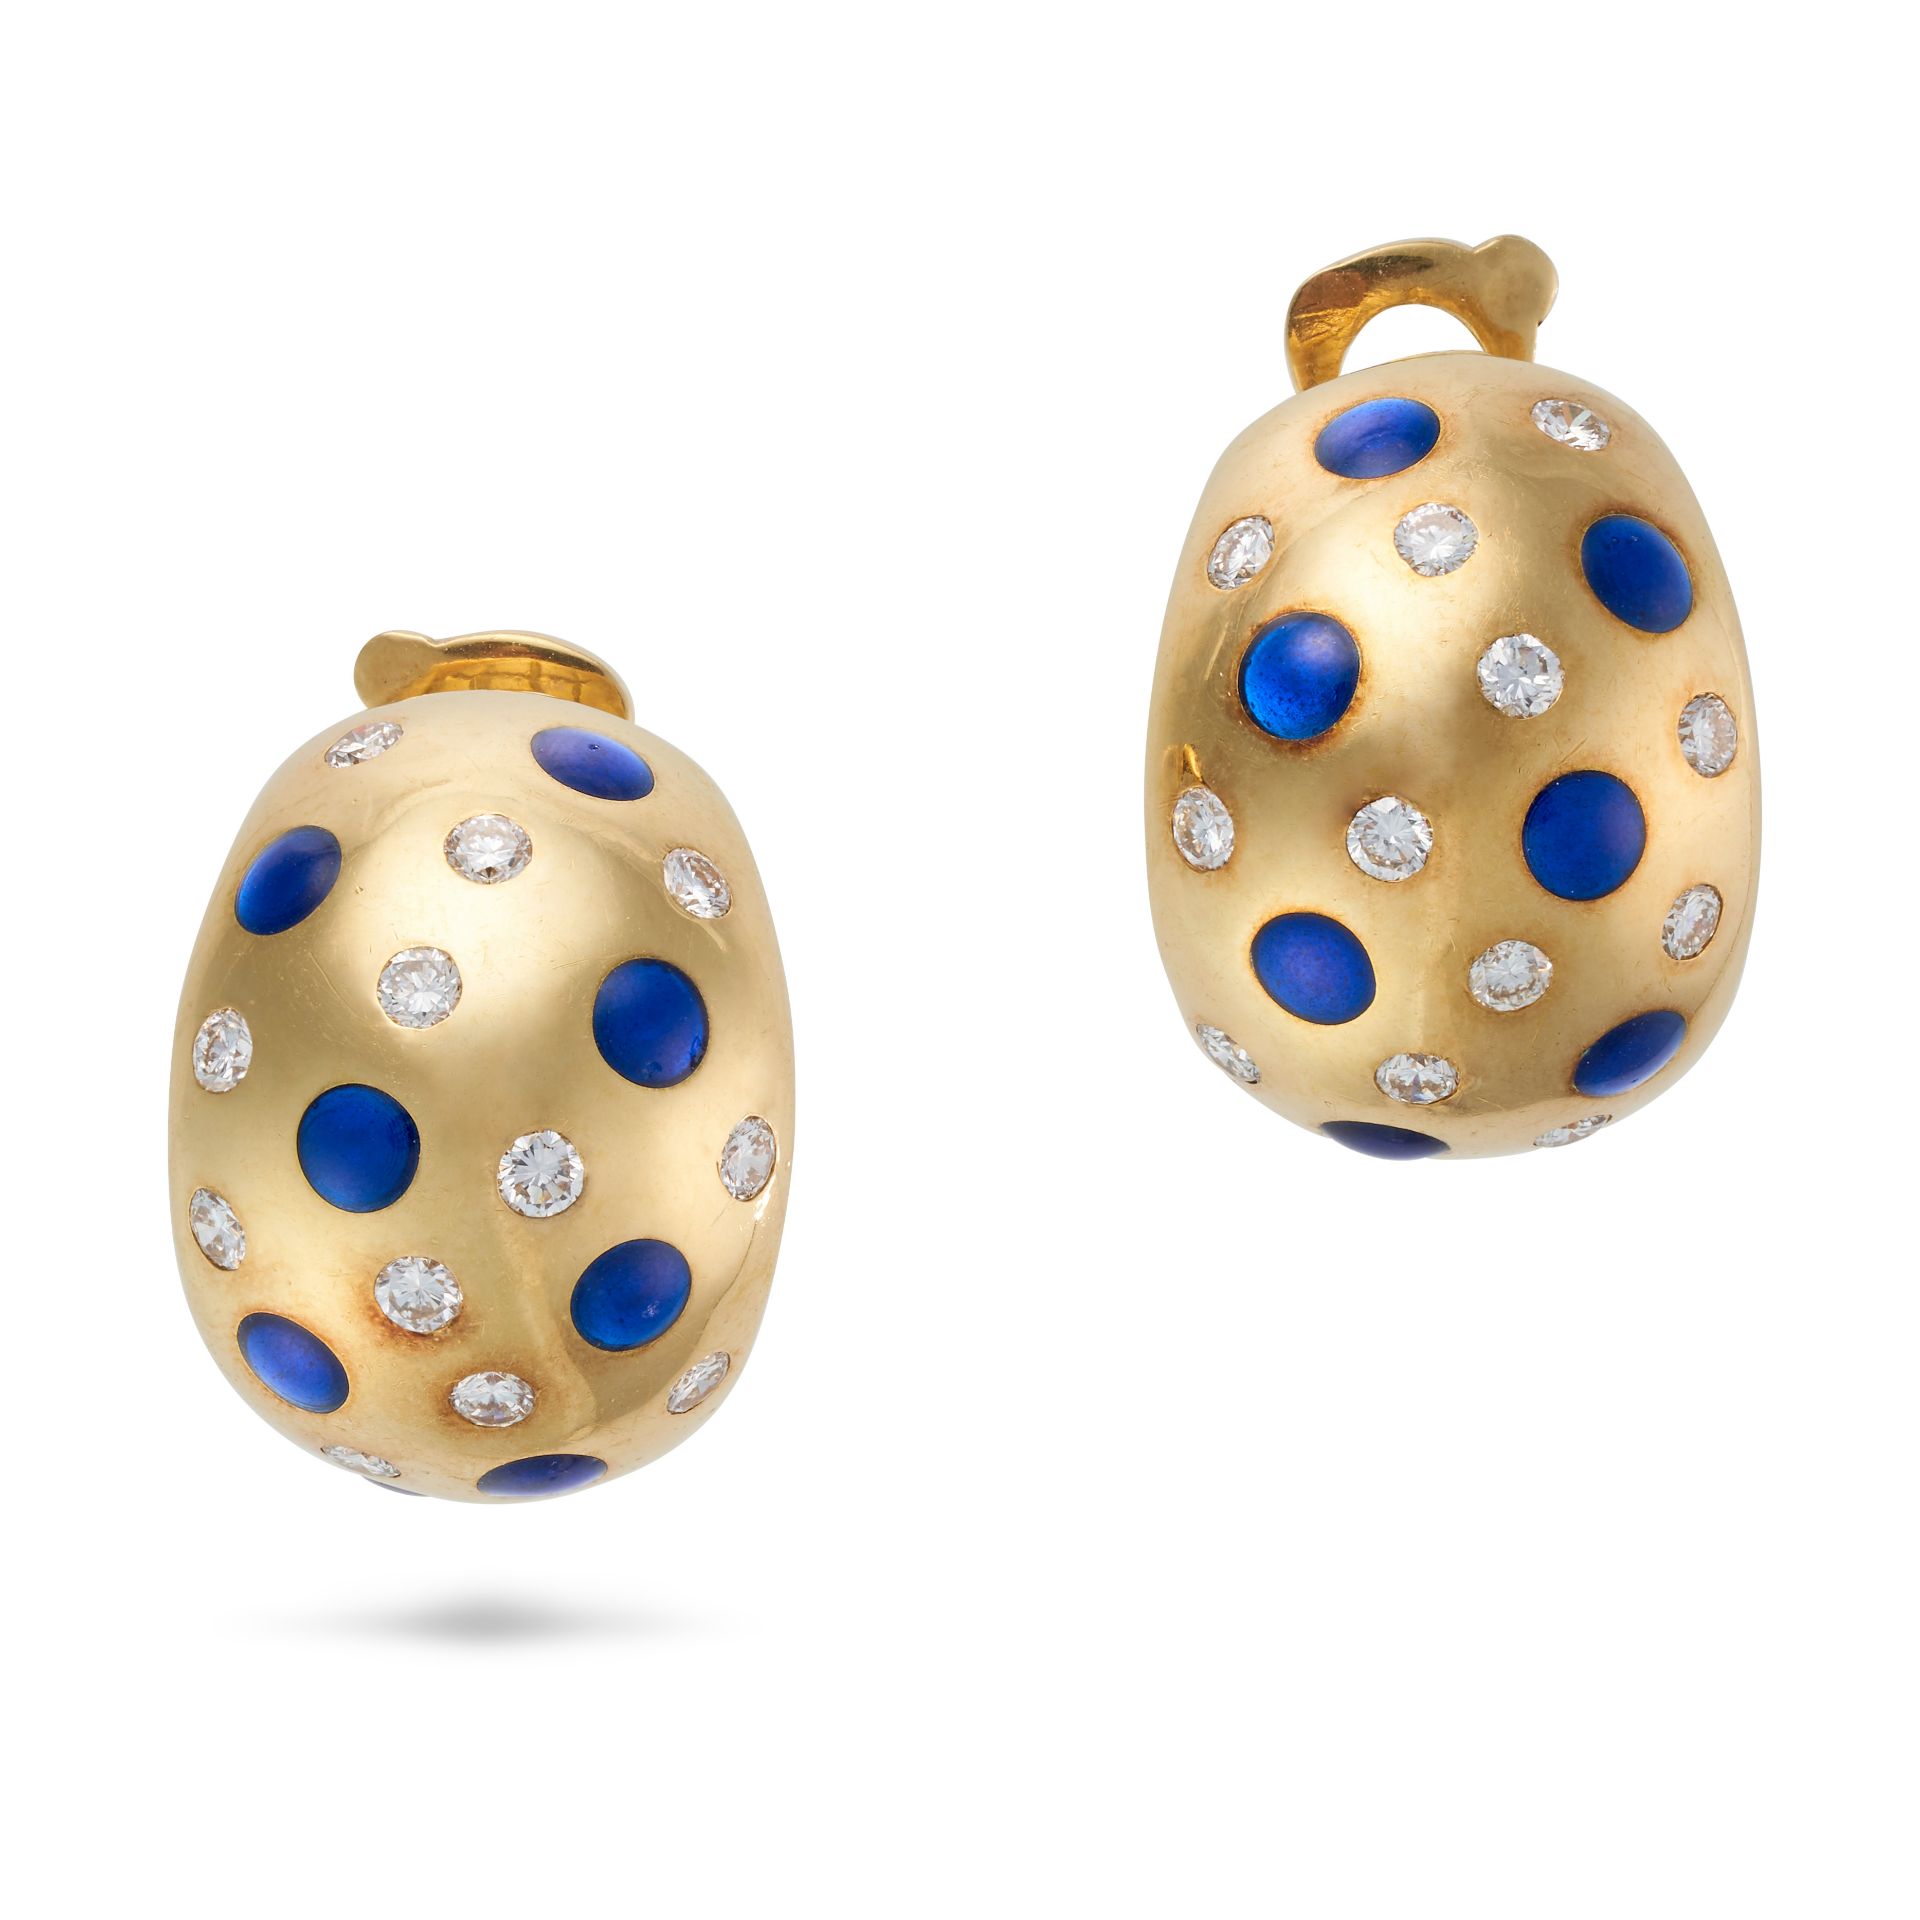 VAN CLEEF & ARPELS, A DIAMOND AND ENAMEL RING AND EARRINGS SUITE the bombe ring set with round br... - Bild 4 aus 4